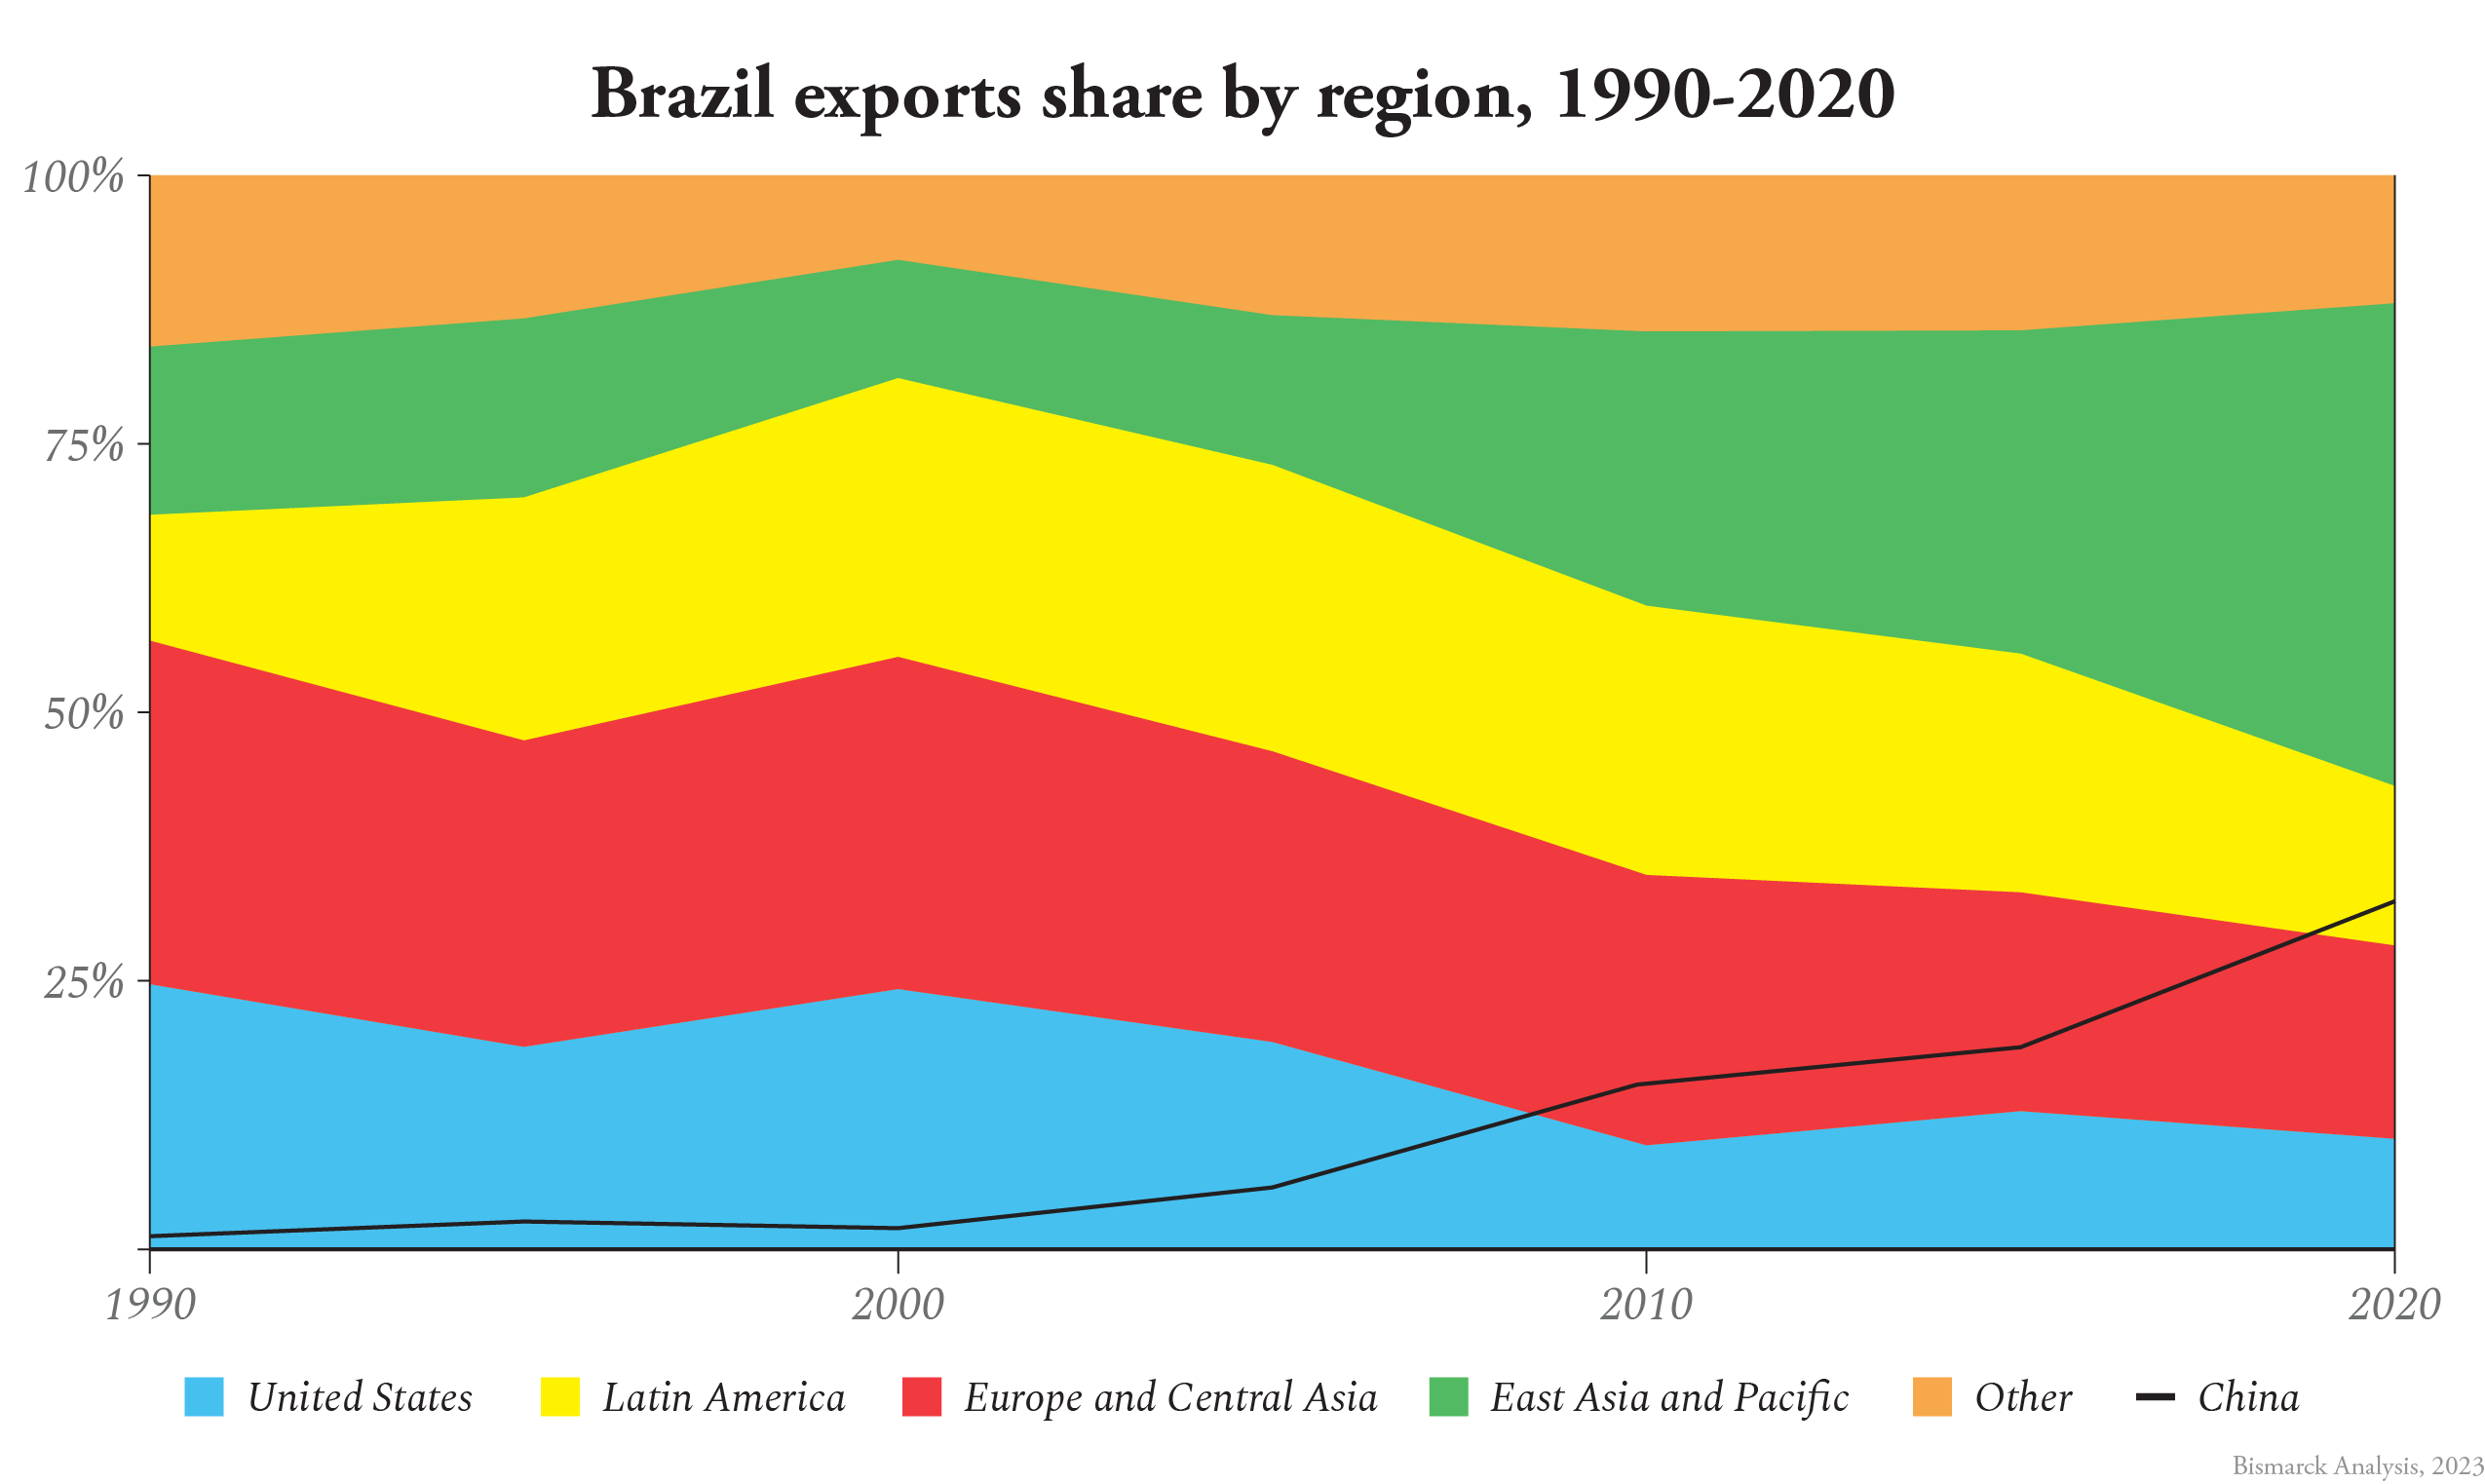 USDA ERS - Brazil's Momentum as a Global Agricultural Supplier